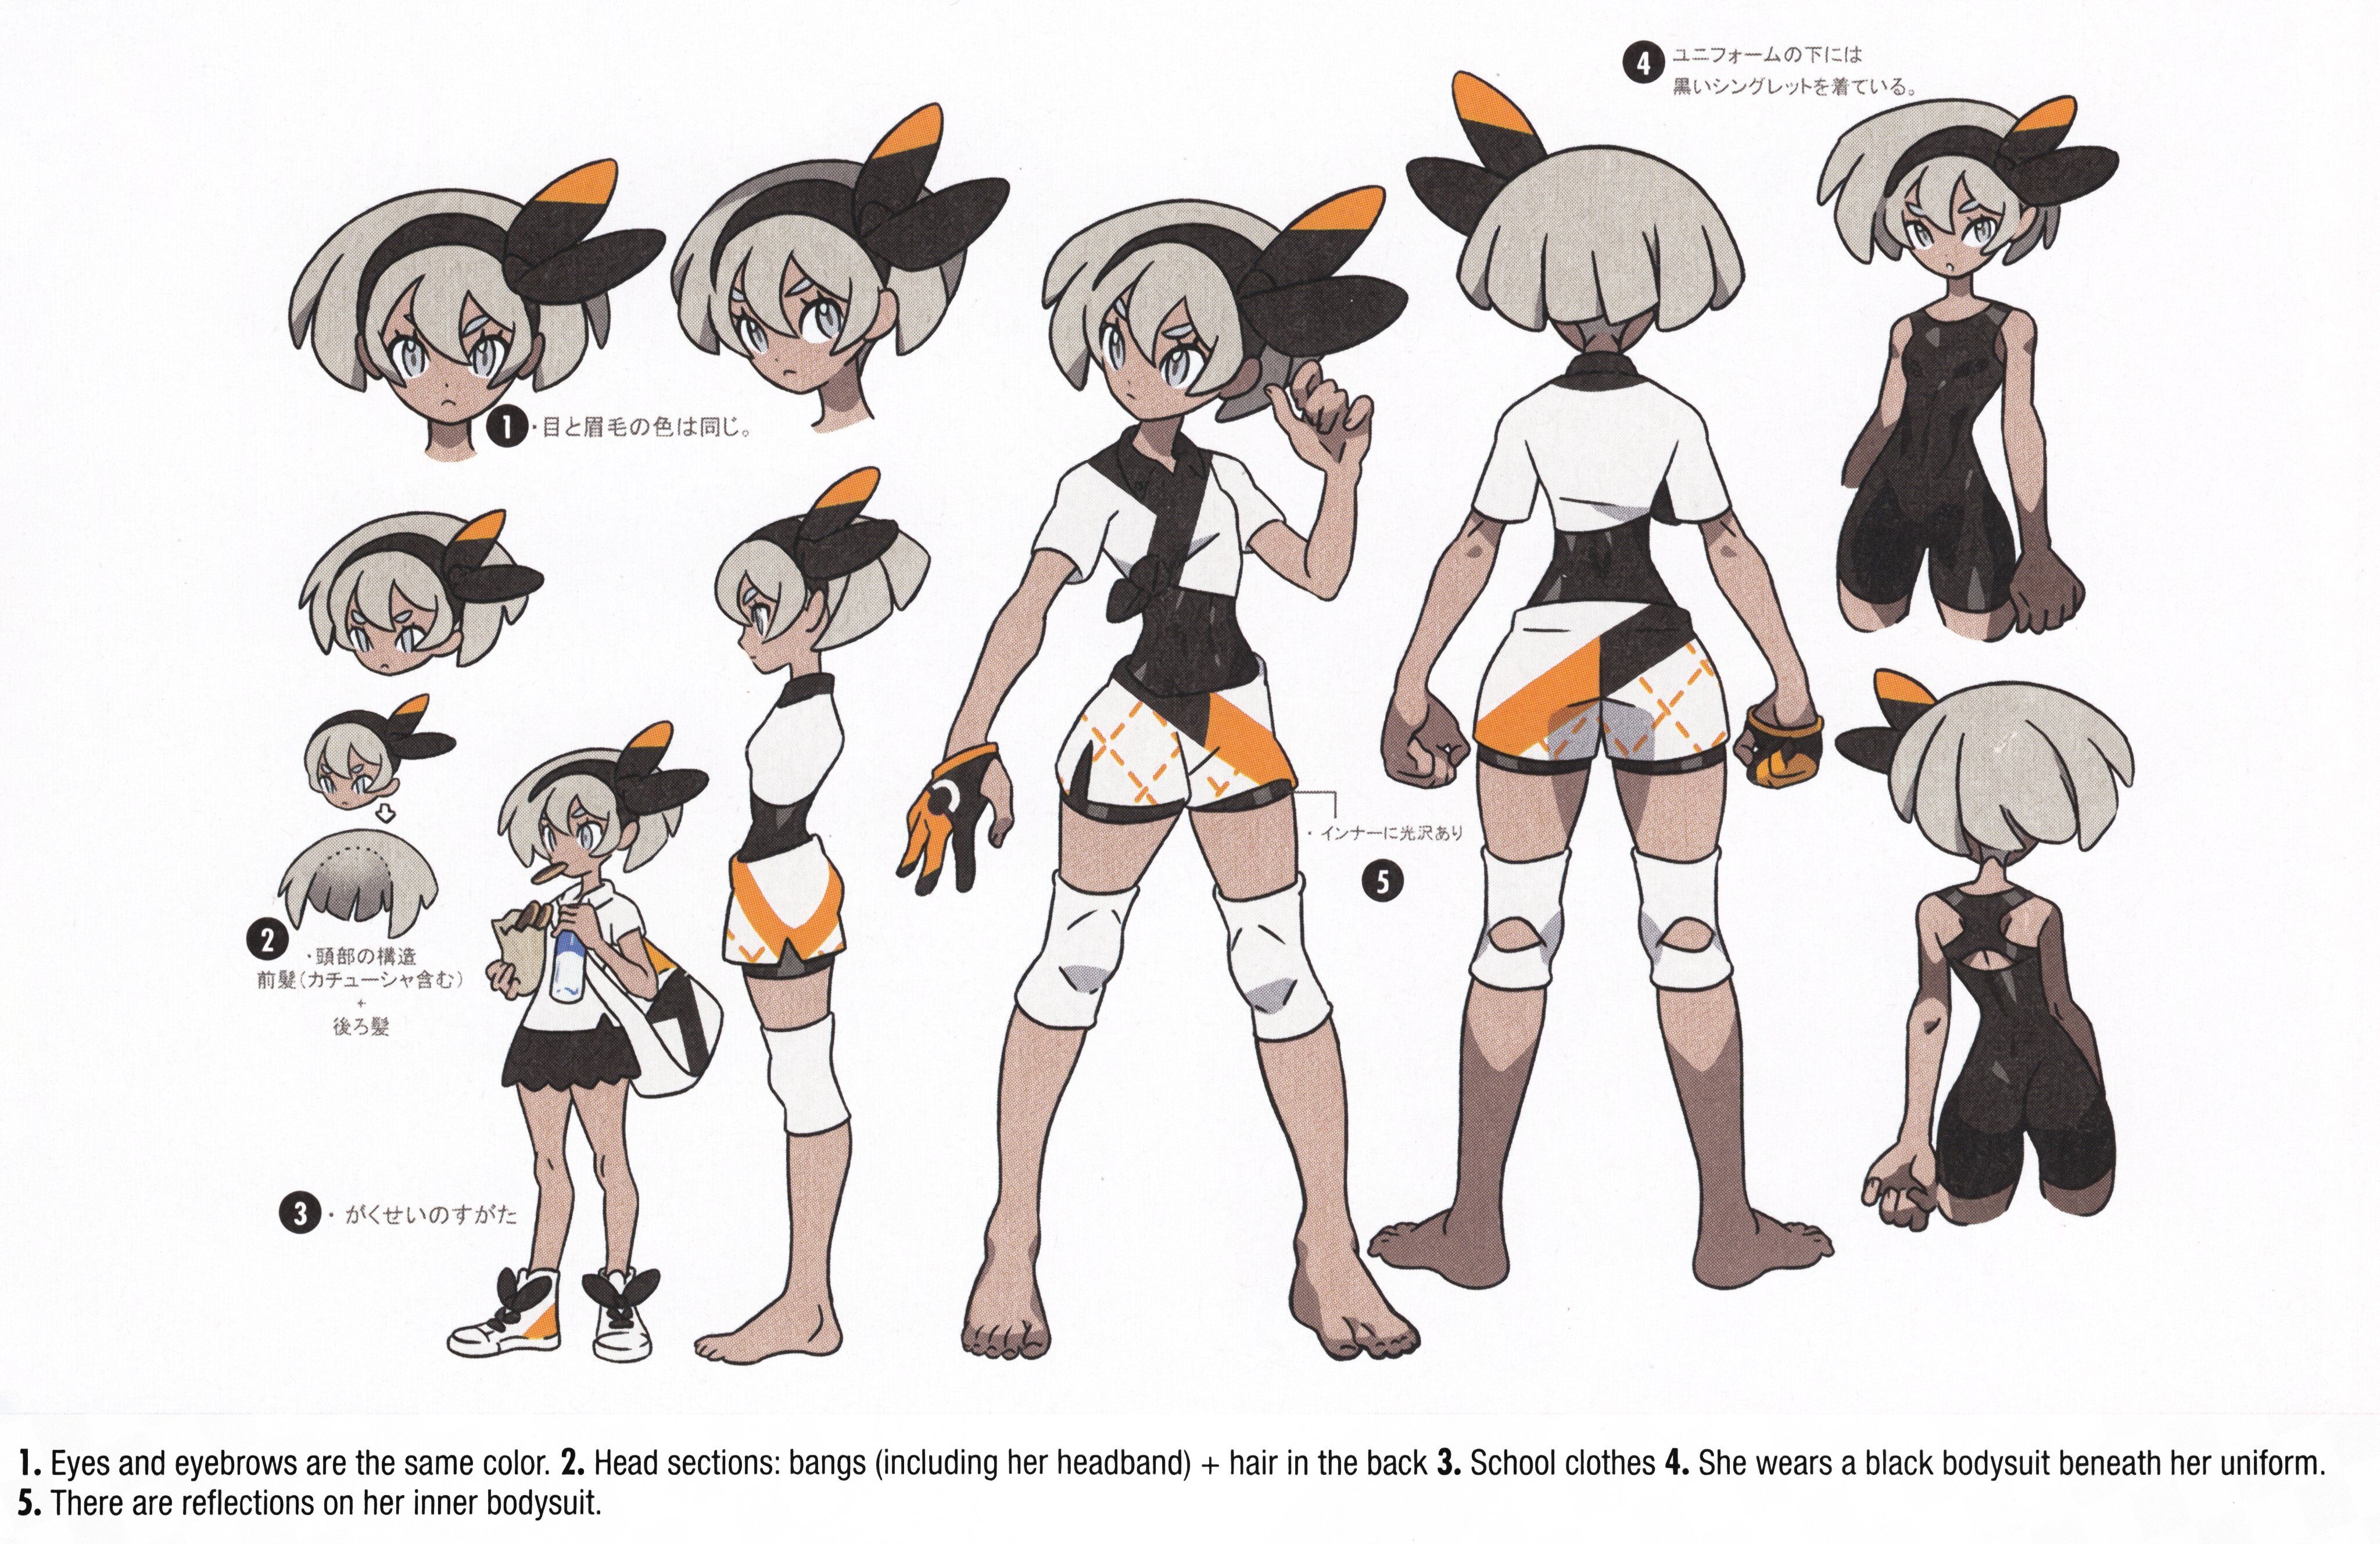 BulbaNewsNOW on X: In Pokémon Sword and Shield, some Gym Leaders differ  between games. In Pokémon Sword, players will battle the Fighting-type  expert, Bea. In Pokémon Shield, players will battle the Ghost-type